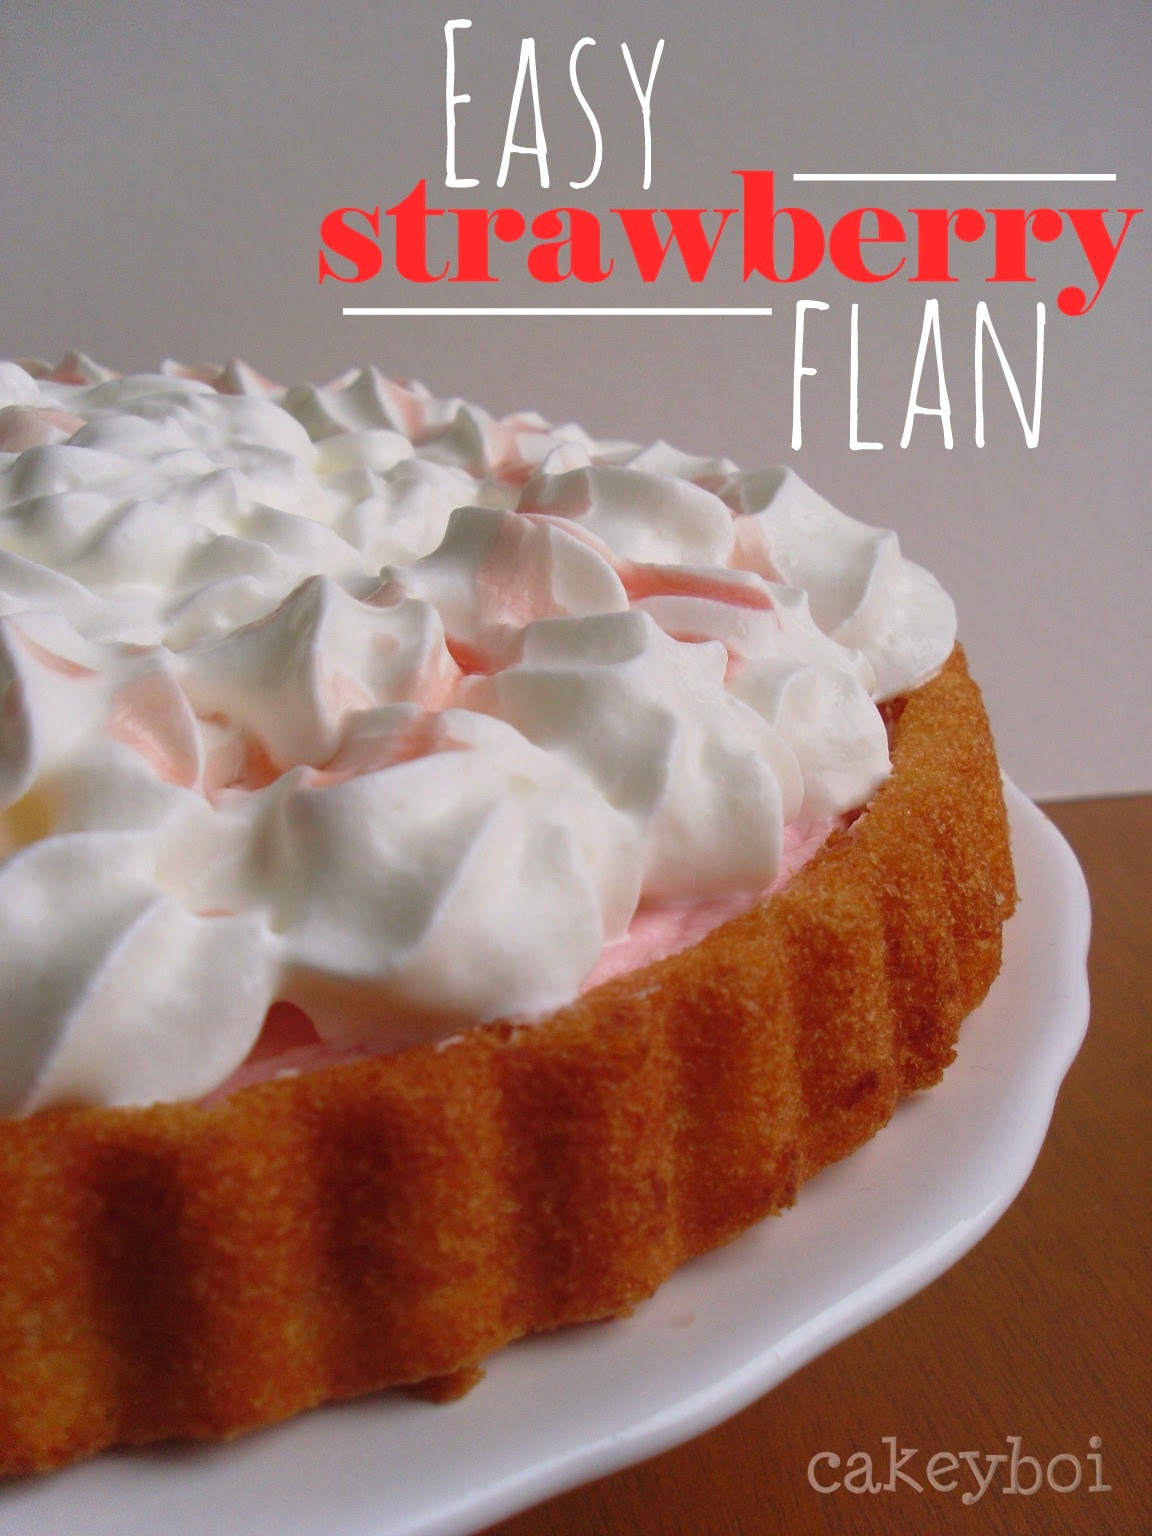 Fastest Strawberry Flan made in under 30 minutes!